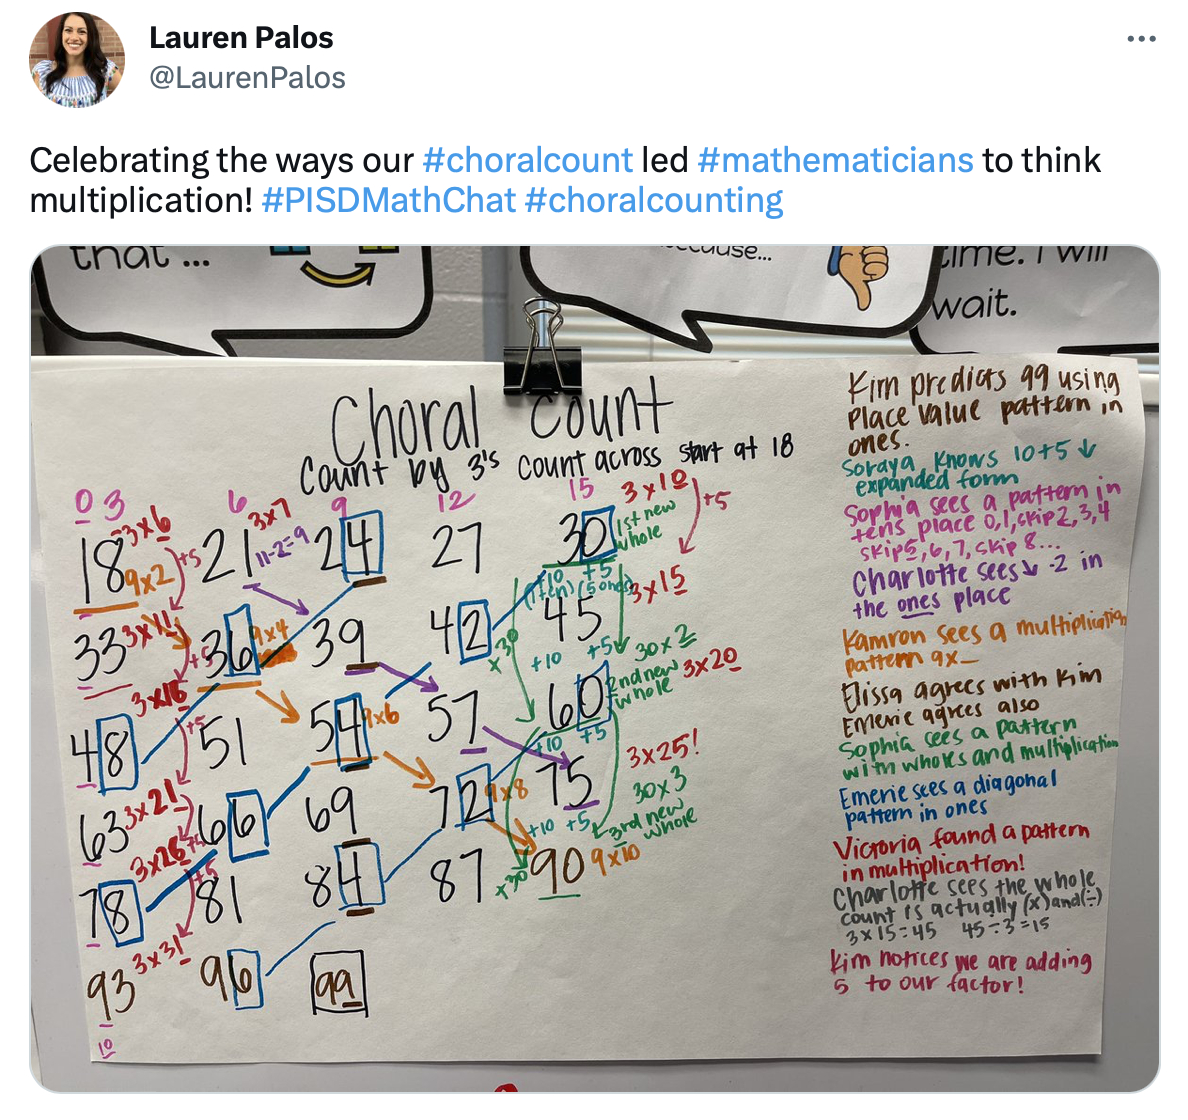 A tweet from Lauren Palos. The image shows a choral count with “count by 3s count across start at 18” written at the top. Numbers skip counting by 3s from 18-99 are recorded with 5 numbers per line. Students’ noticings are jotted along the side of the chart.